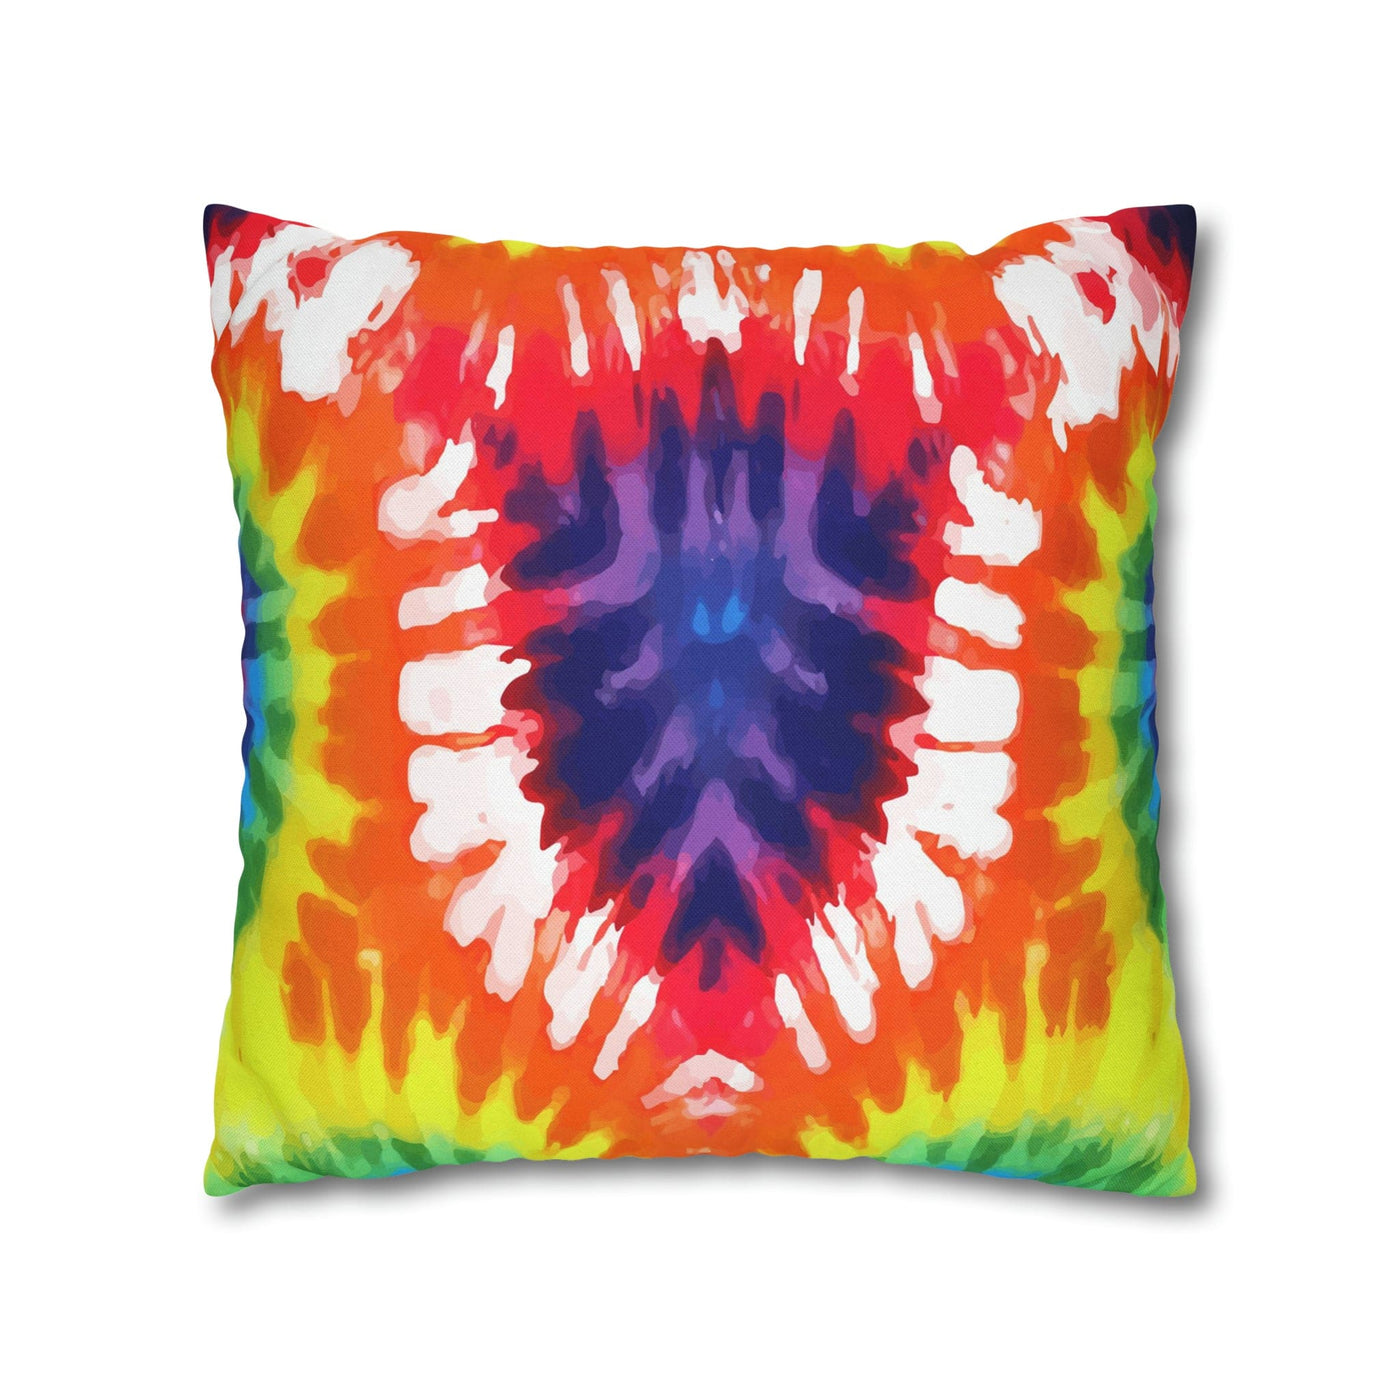 Decorative Throw Pillow Covers With Zipper - Set Of 2 Psychedelic Rainbow Tie